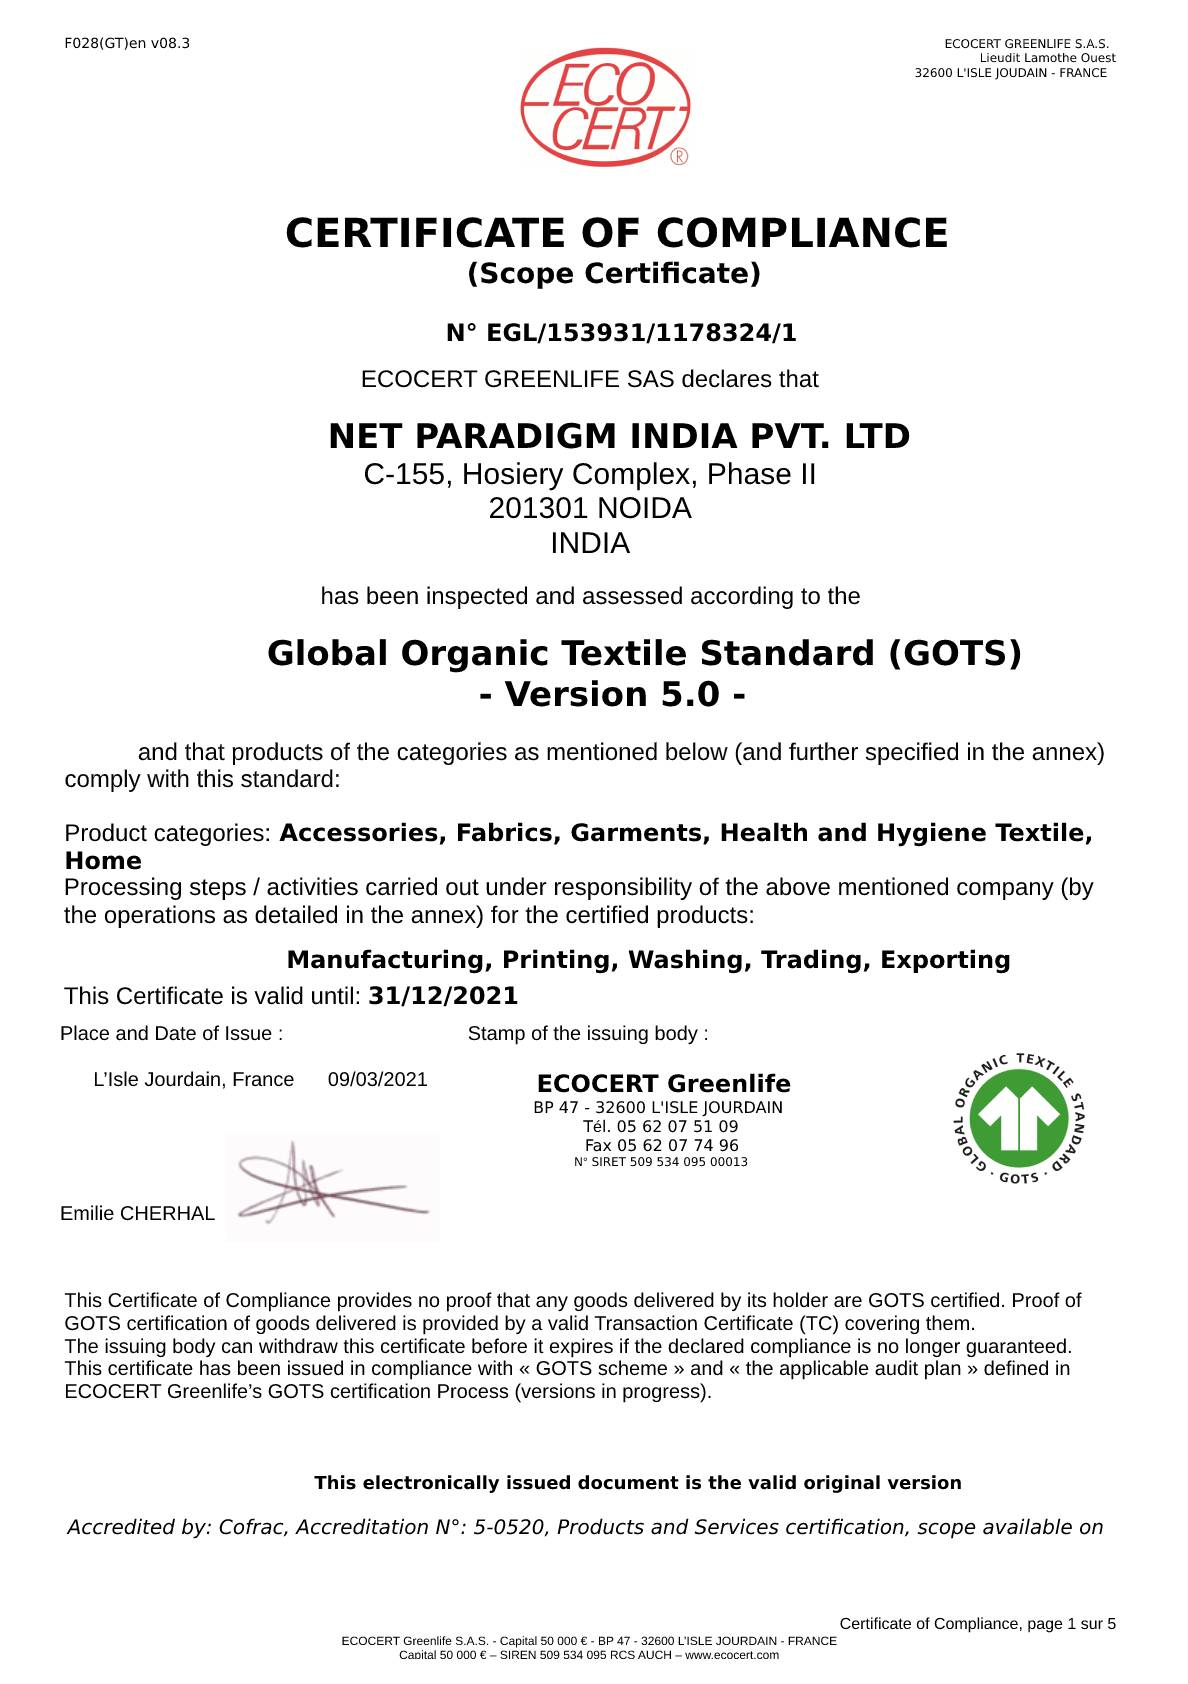 GOTS Global Organic Textile Standard Consultant at best price in